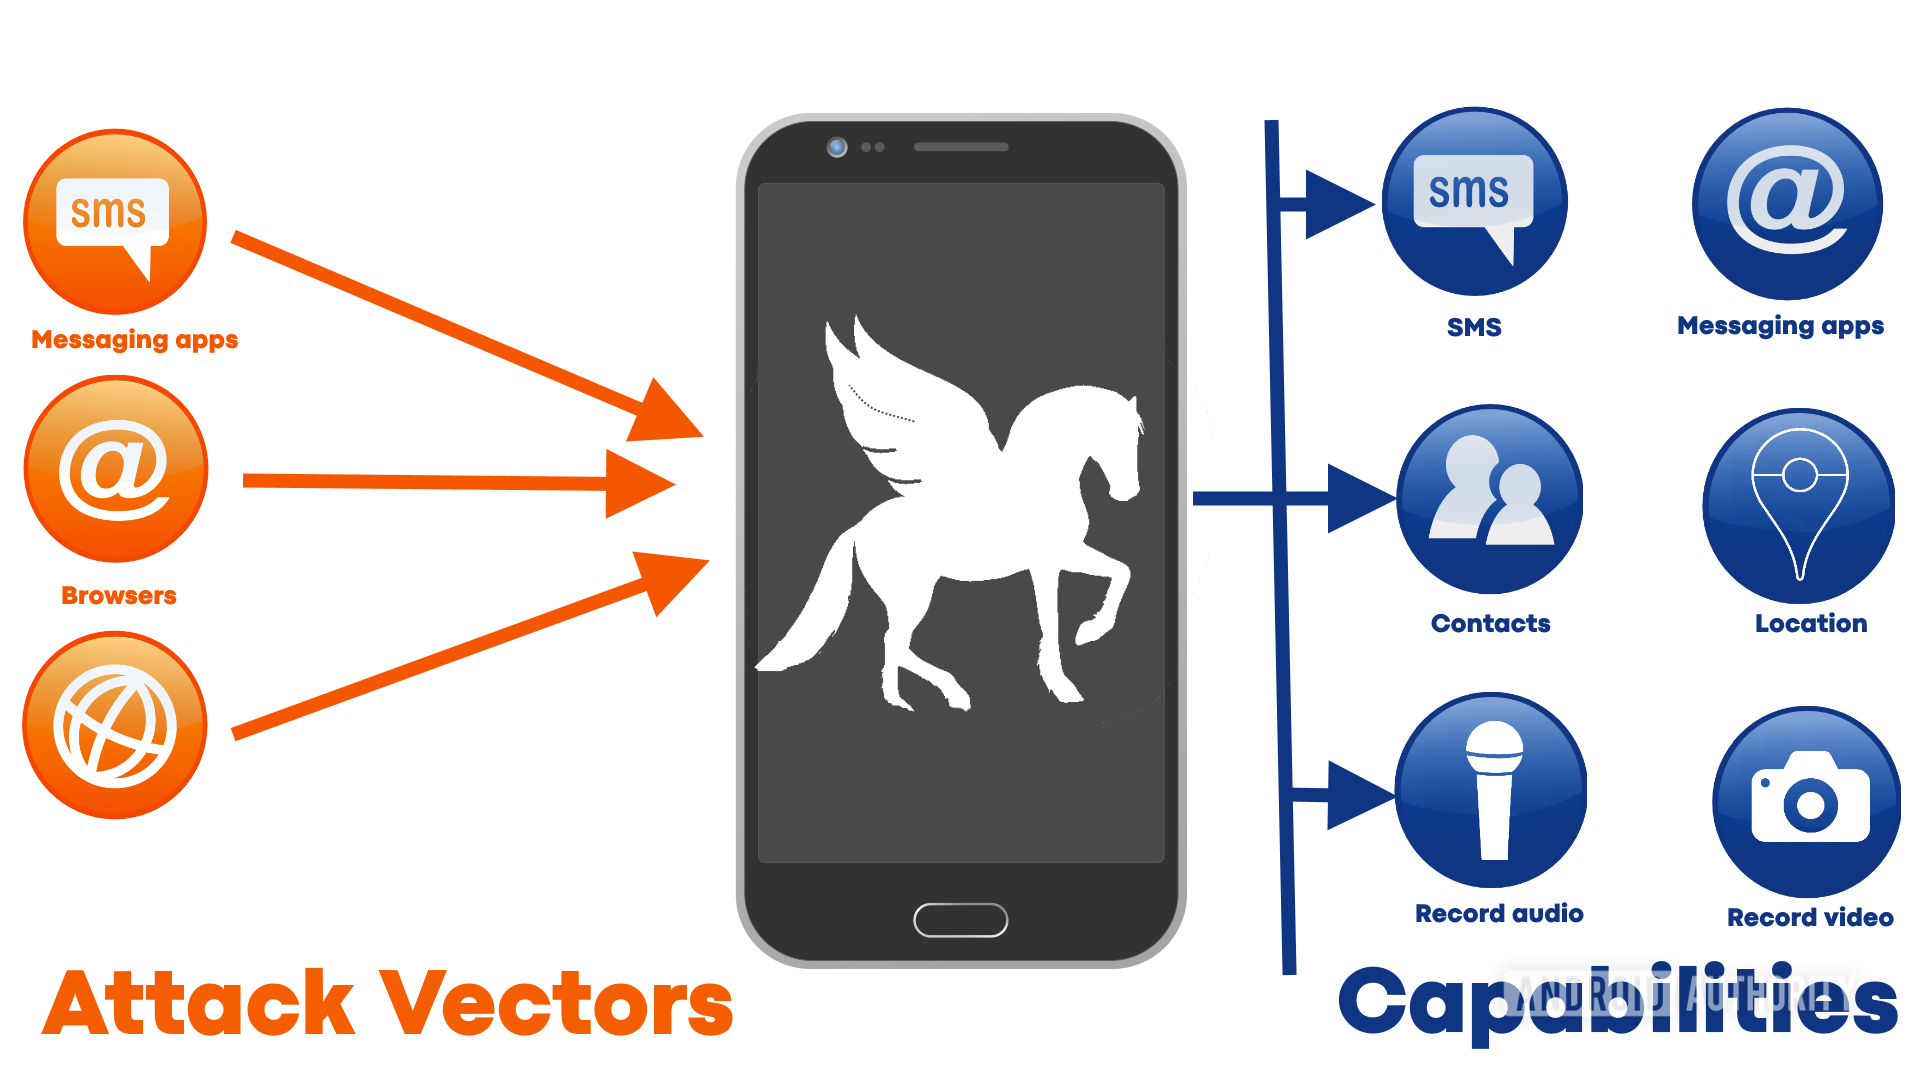 Pegasus spyware infographic showing attack vectors and capabilities.